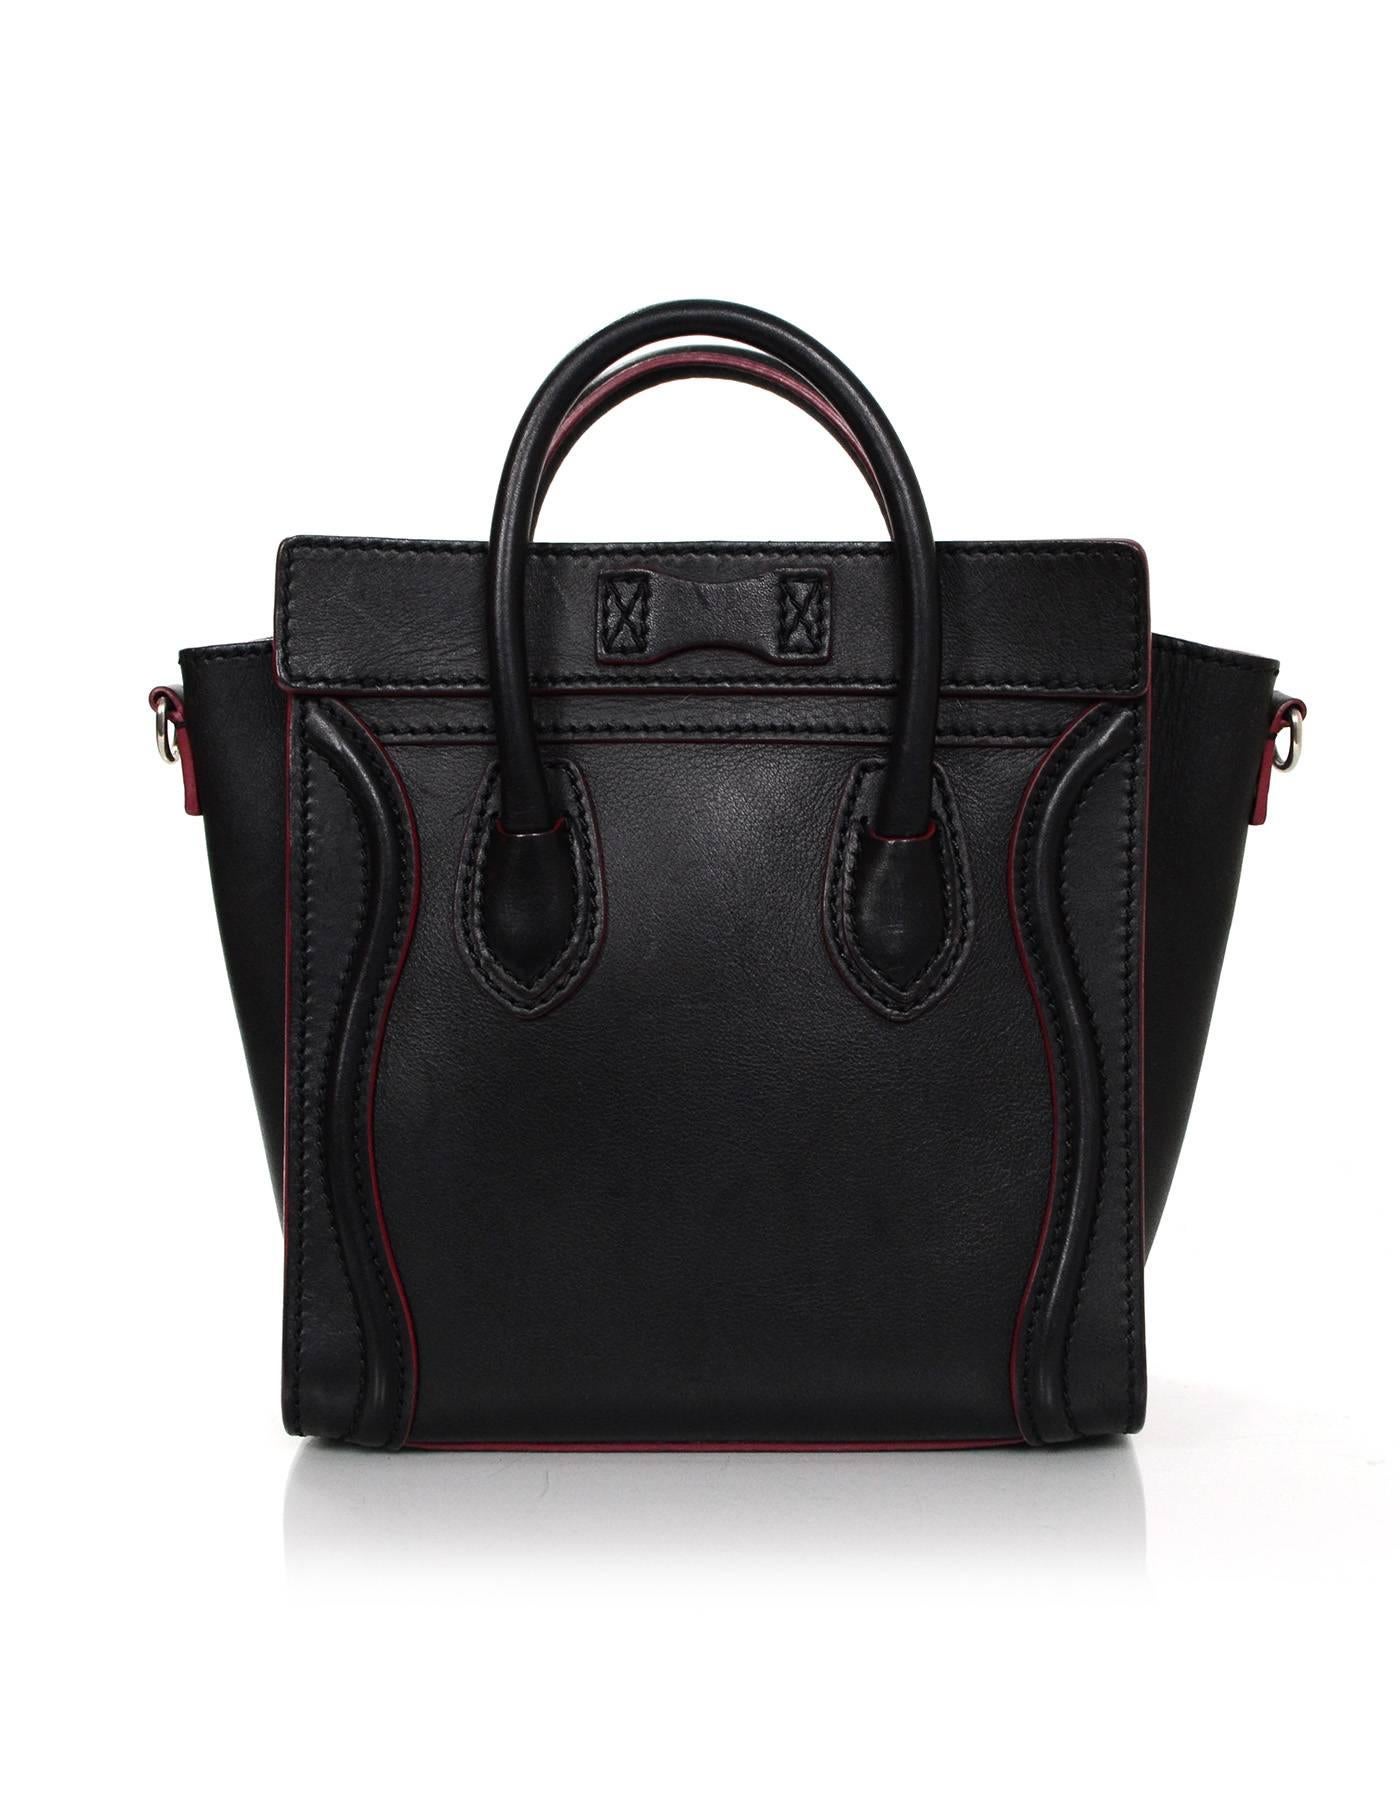 Celine Black Leather Nano Luggage Satchel 
Features burgundy trim throughout exterior and detachable shoulder/crossbody strap

Made In: Italy
Year of Production: 2012
Color: Black and burgundy
Hardware: Silvertone
Materials: Leather
Lining: Black